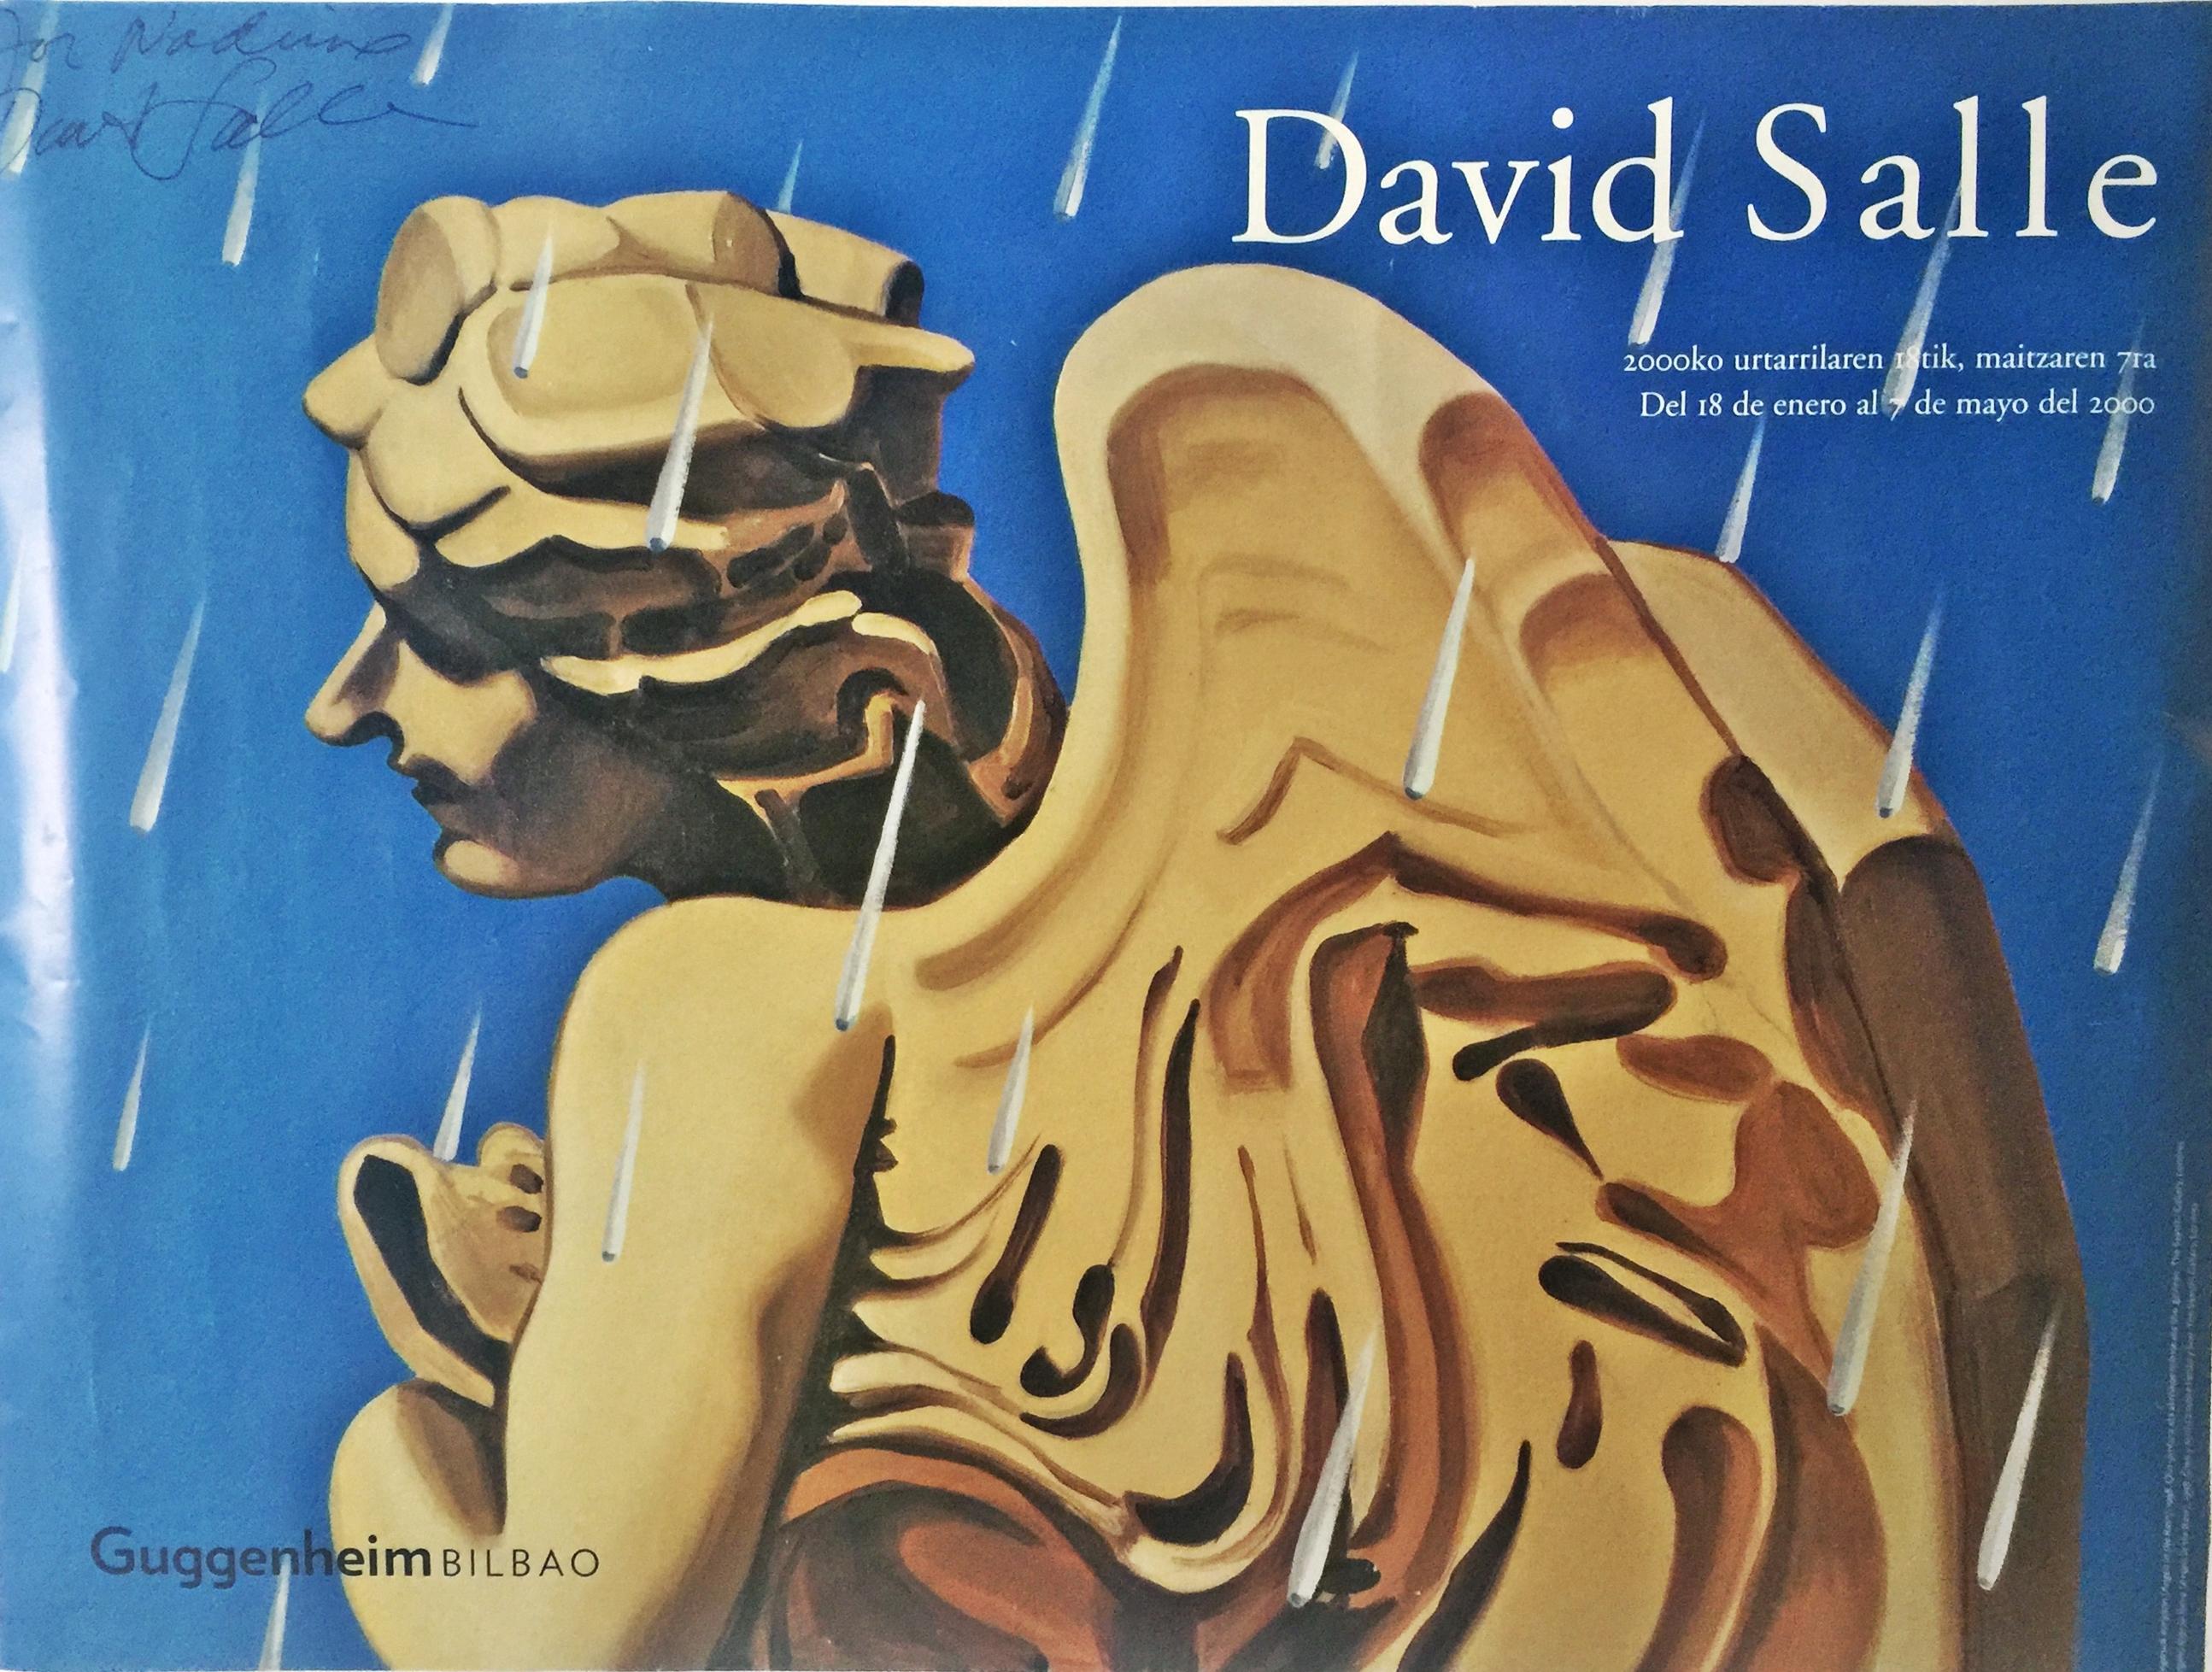 David Salle
Hand Signed Poster by David Salle upper left, 2000
Offset Lithograph
Signed by the artist and dedicated to Nadine 
25 × 30 inches
Unframed
This is a uniquely signed David Salle offset lithograph poster from his 2000 exhibition at the